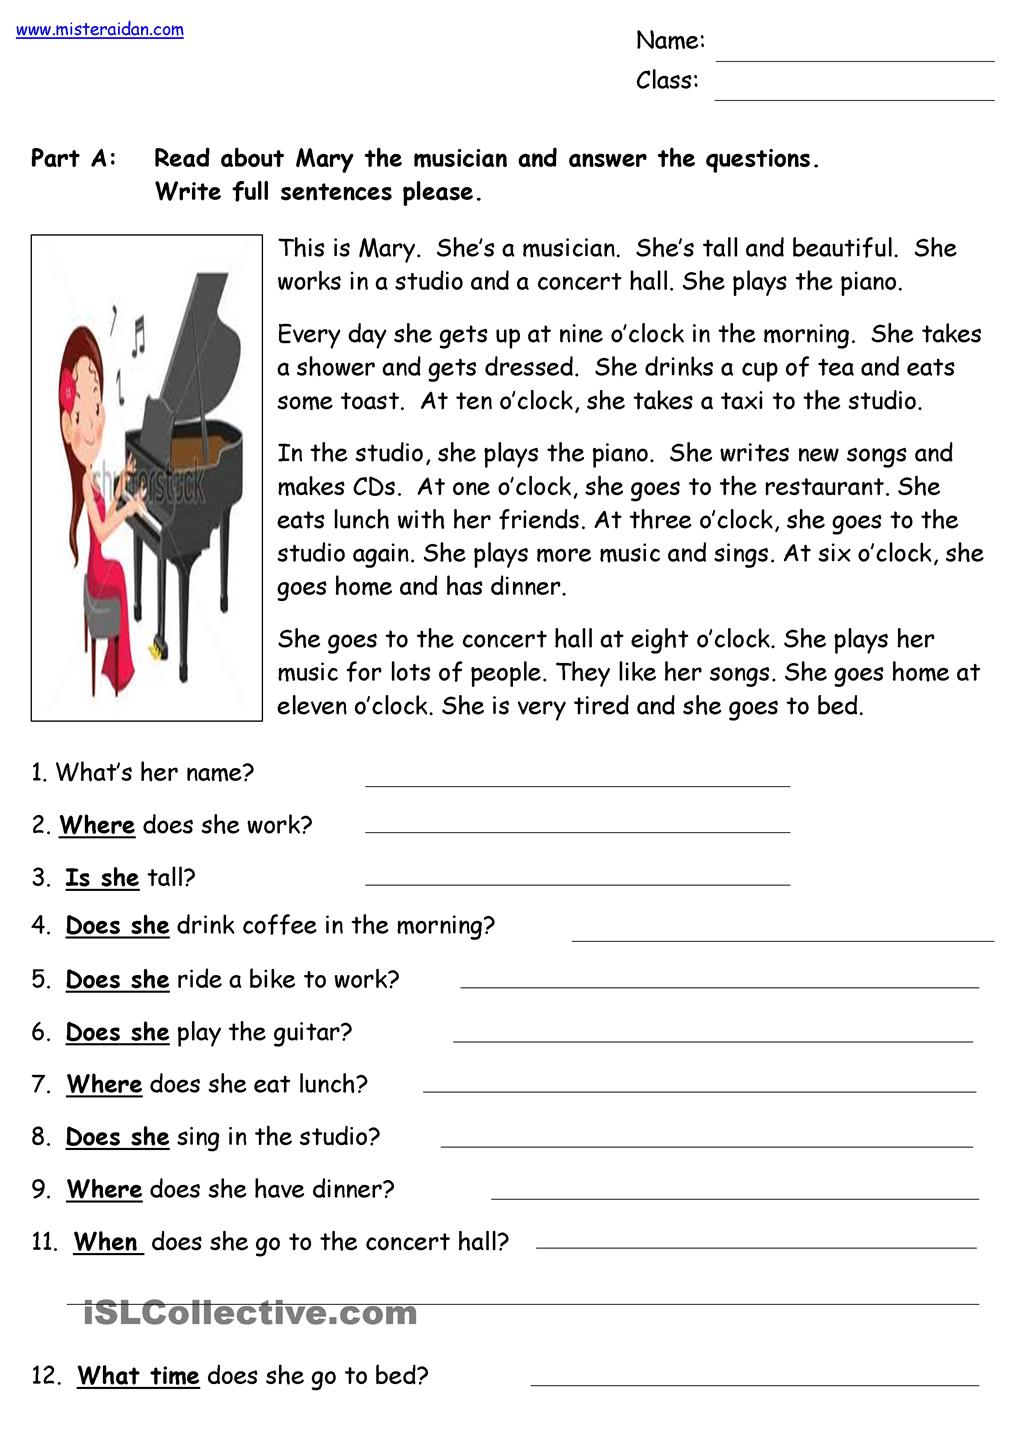 Reading Comprehension Worksheets For 11 Year Olds Dorothy James 11 Year Old Boy Runs Off Old